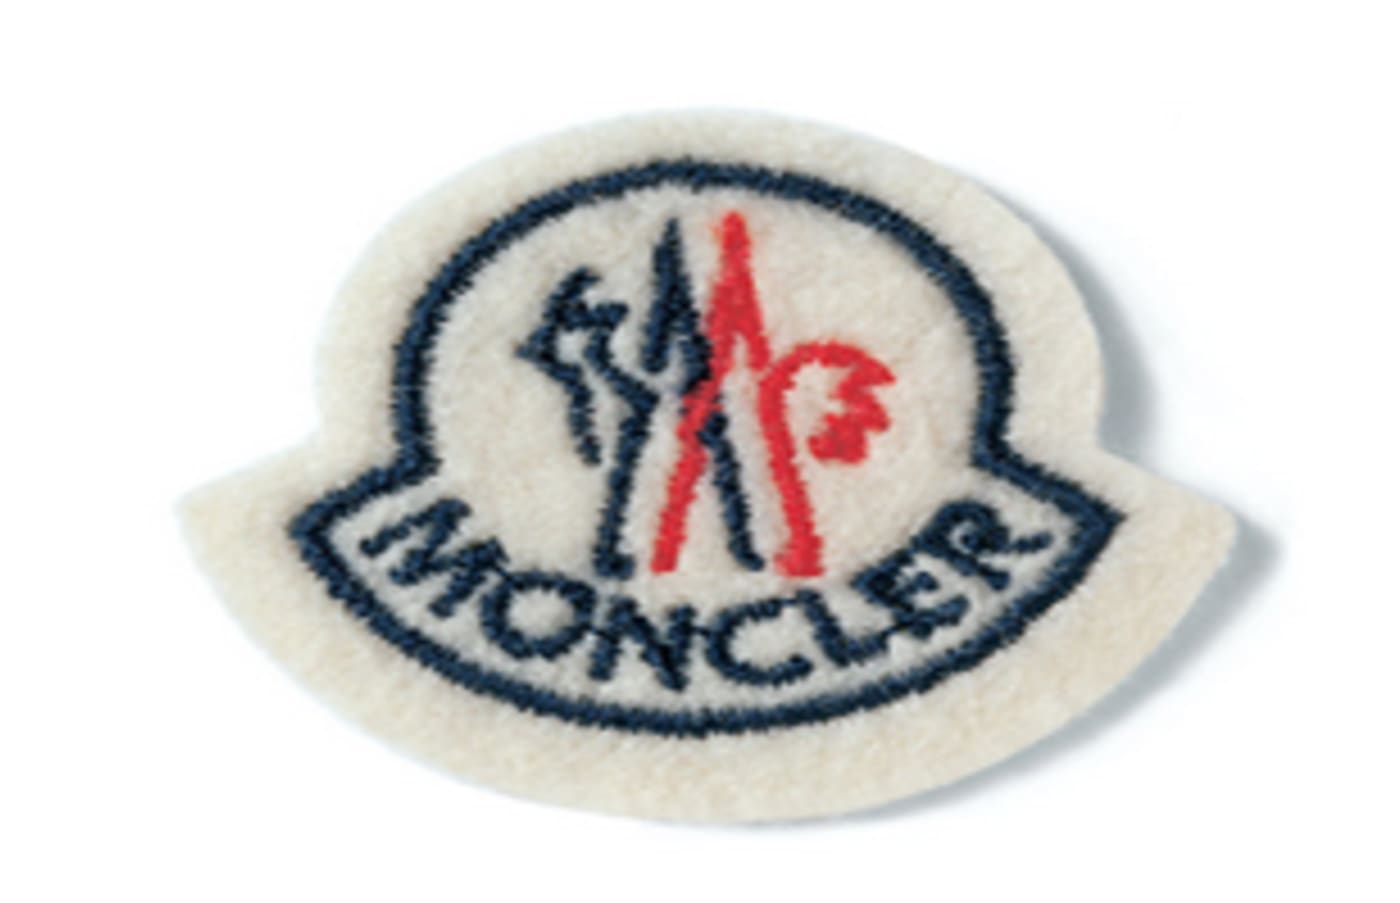 Moncler: Find The Latest Moncler Stories, News & Features